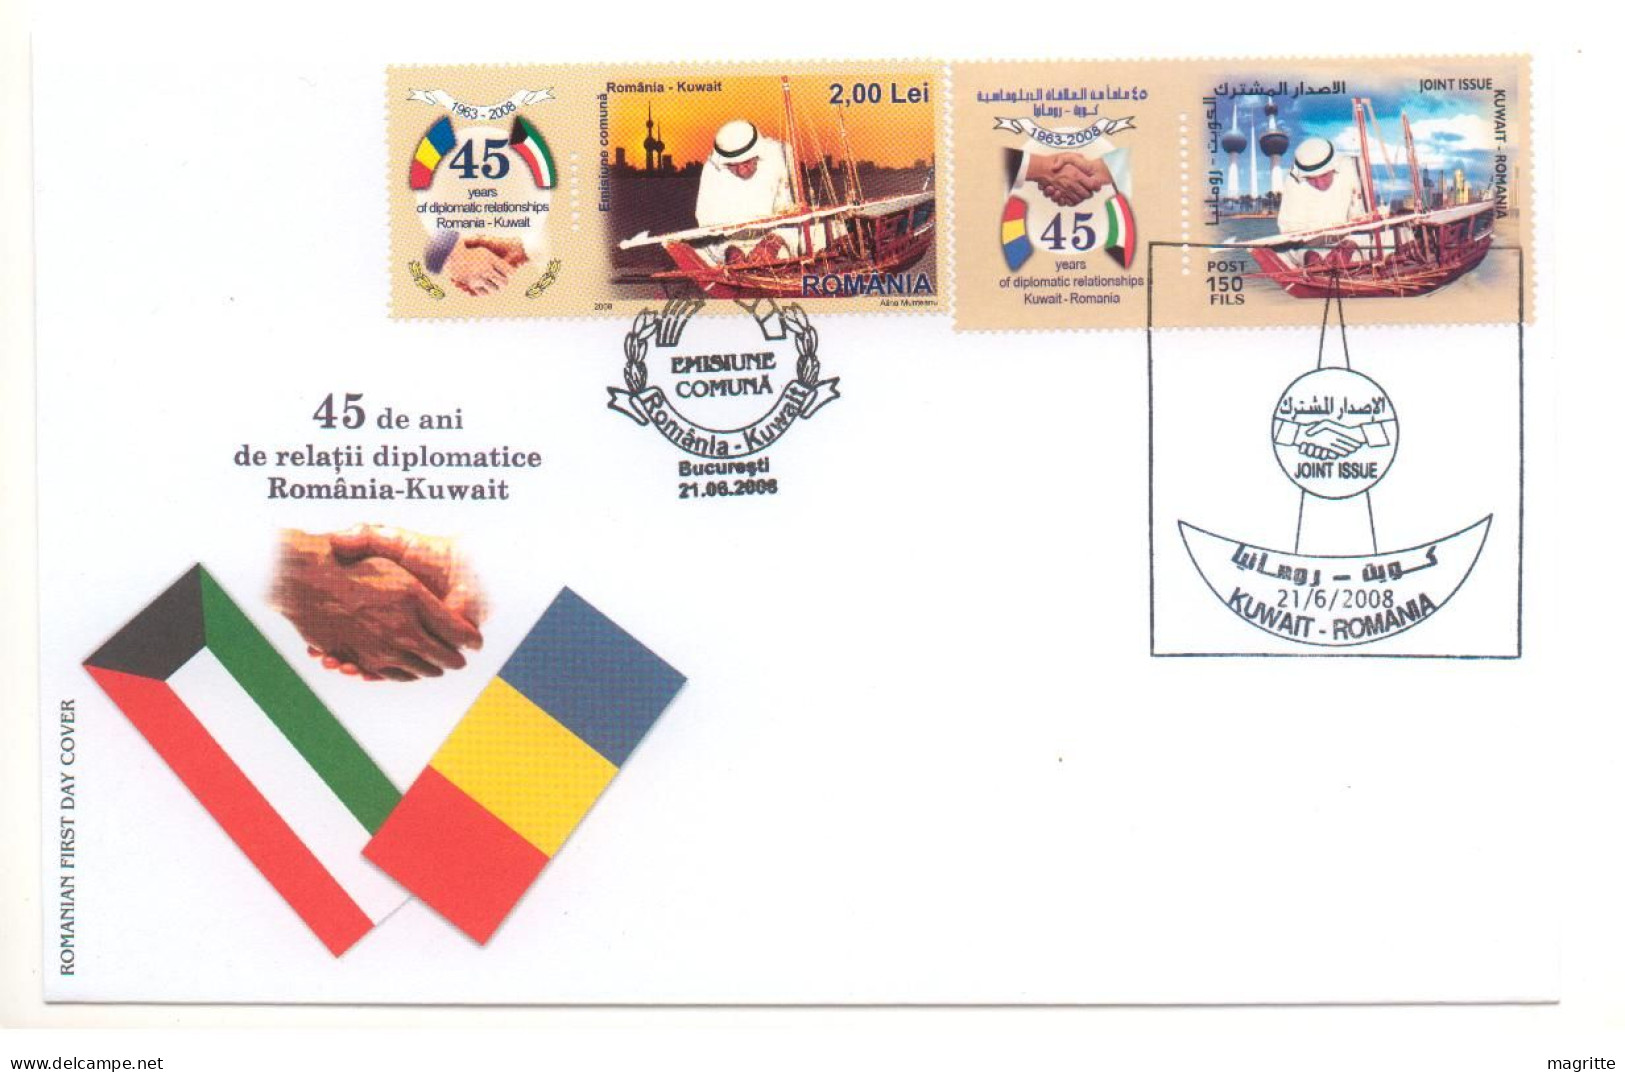 Roumanie Koweit 2008 FDC's Mixtes Emission Commune Romania Kuwait Joint Issue Mixed FDC 's Diplomatic Relationship - Emissions Communes